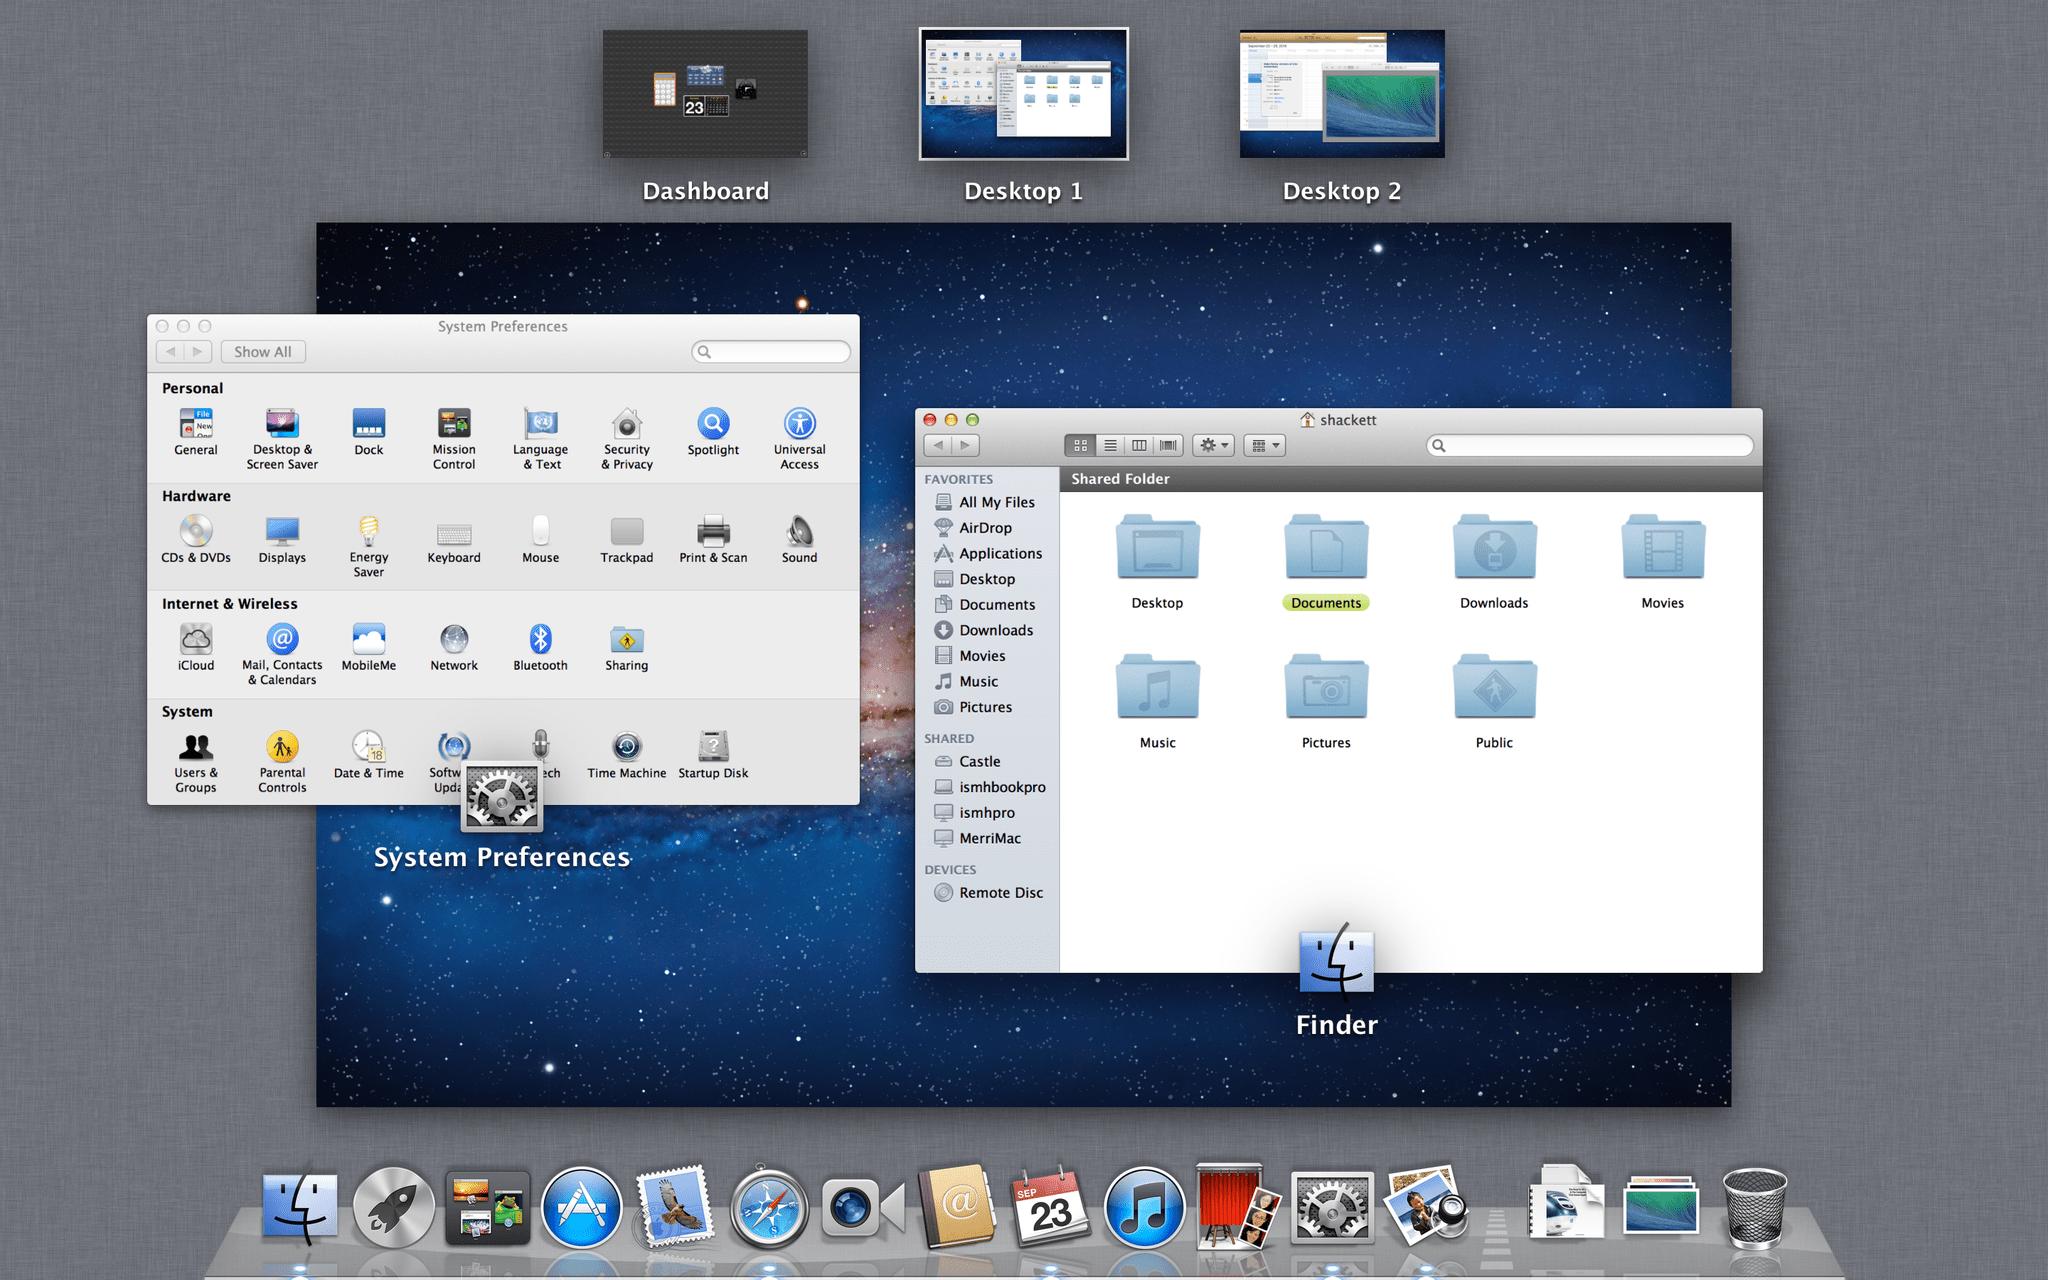 In 2011, as part of OS X Lion, Apple introduced 'Mission Control', which lets you see an overview of all your open windows, fullscreen apps, and spaces. Source: [512 Pixels macOS Screenshot Library](https://512pixels.net/projects/aqua-screenshot-library/mac-os-x-10-7-lion/)